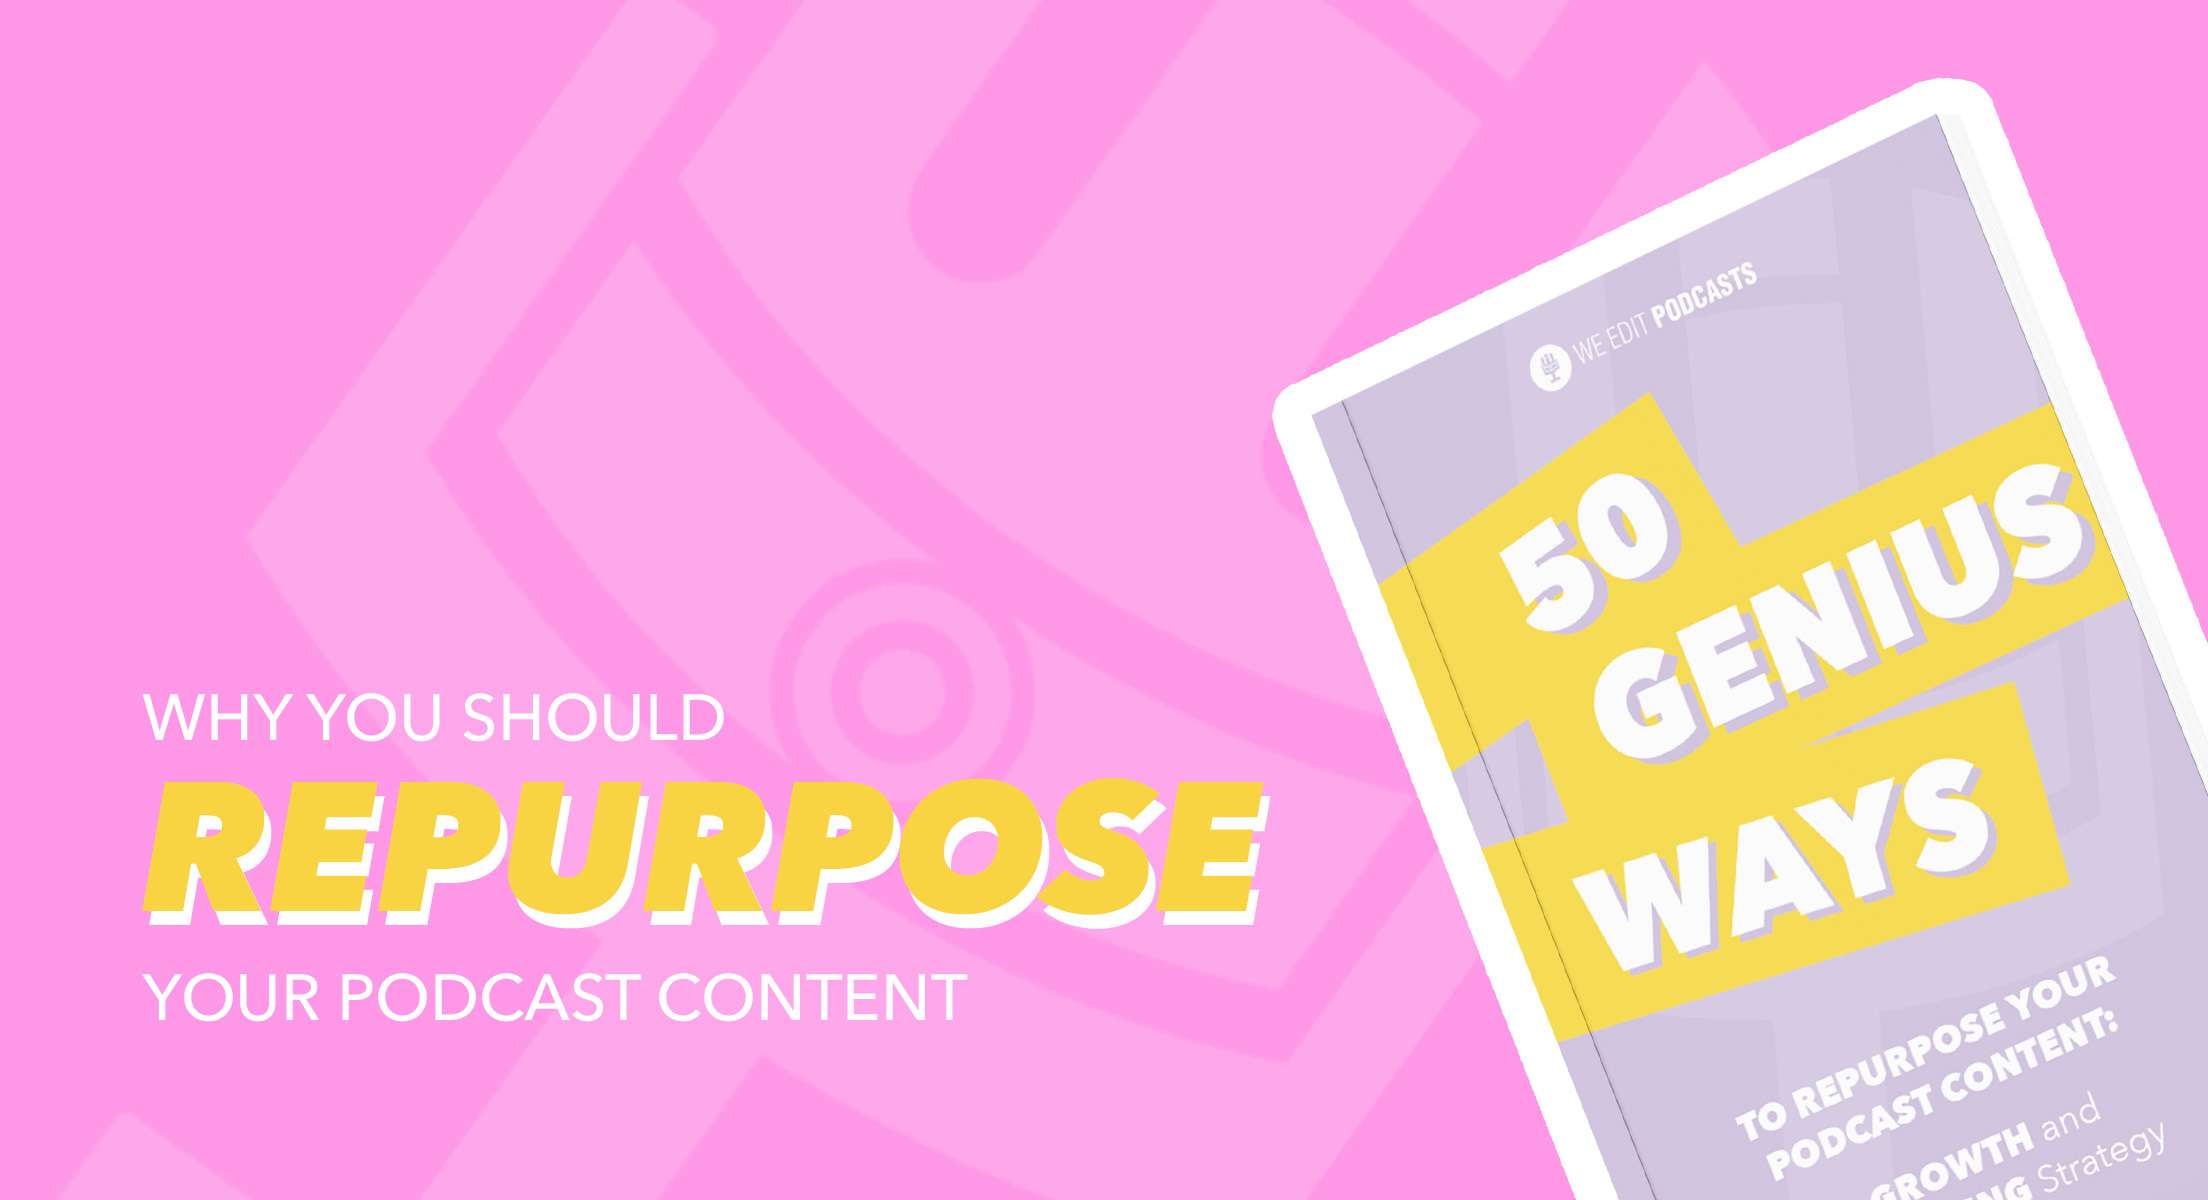 Why Podcasters Should Repurpose Their Podcast Content! Free Resource Inside!